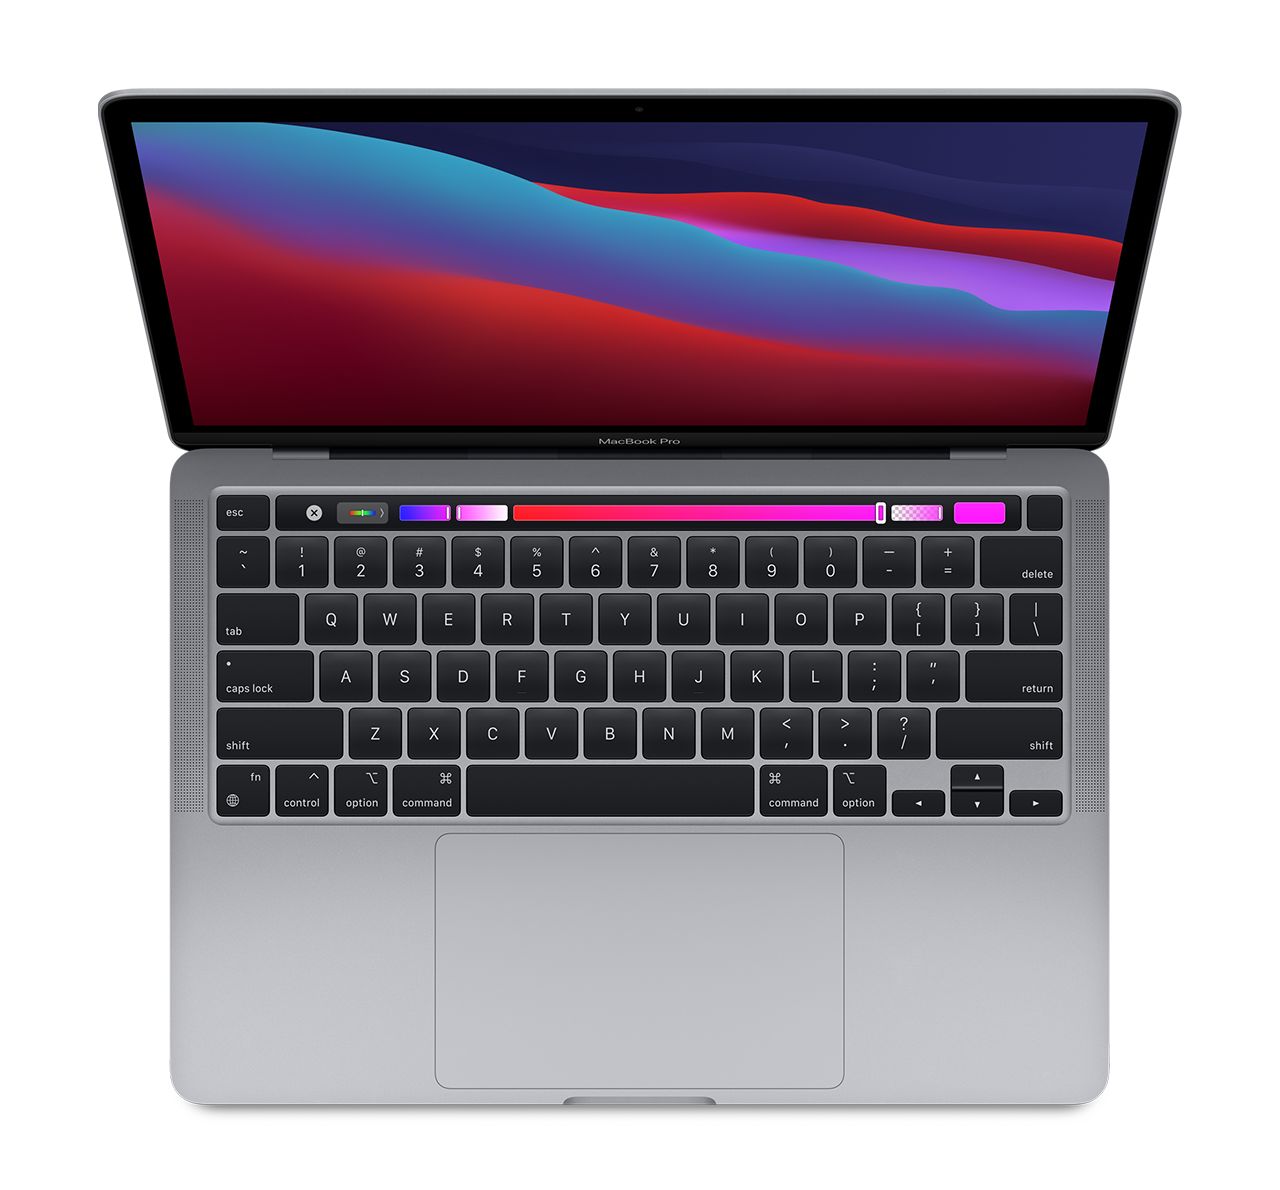 M1 MacBook Pro WATCH BEFORE YOU BUY Mac tips and tricks from techmirrors